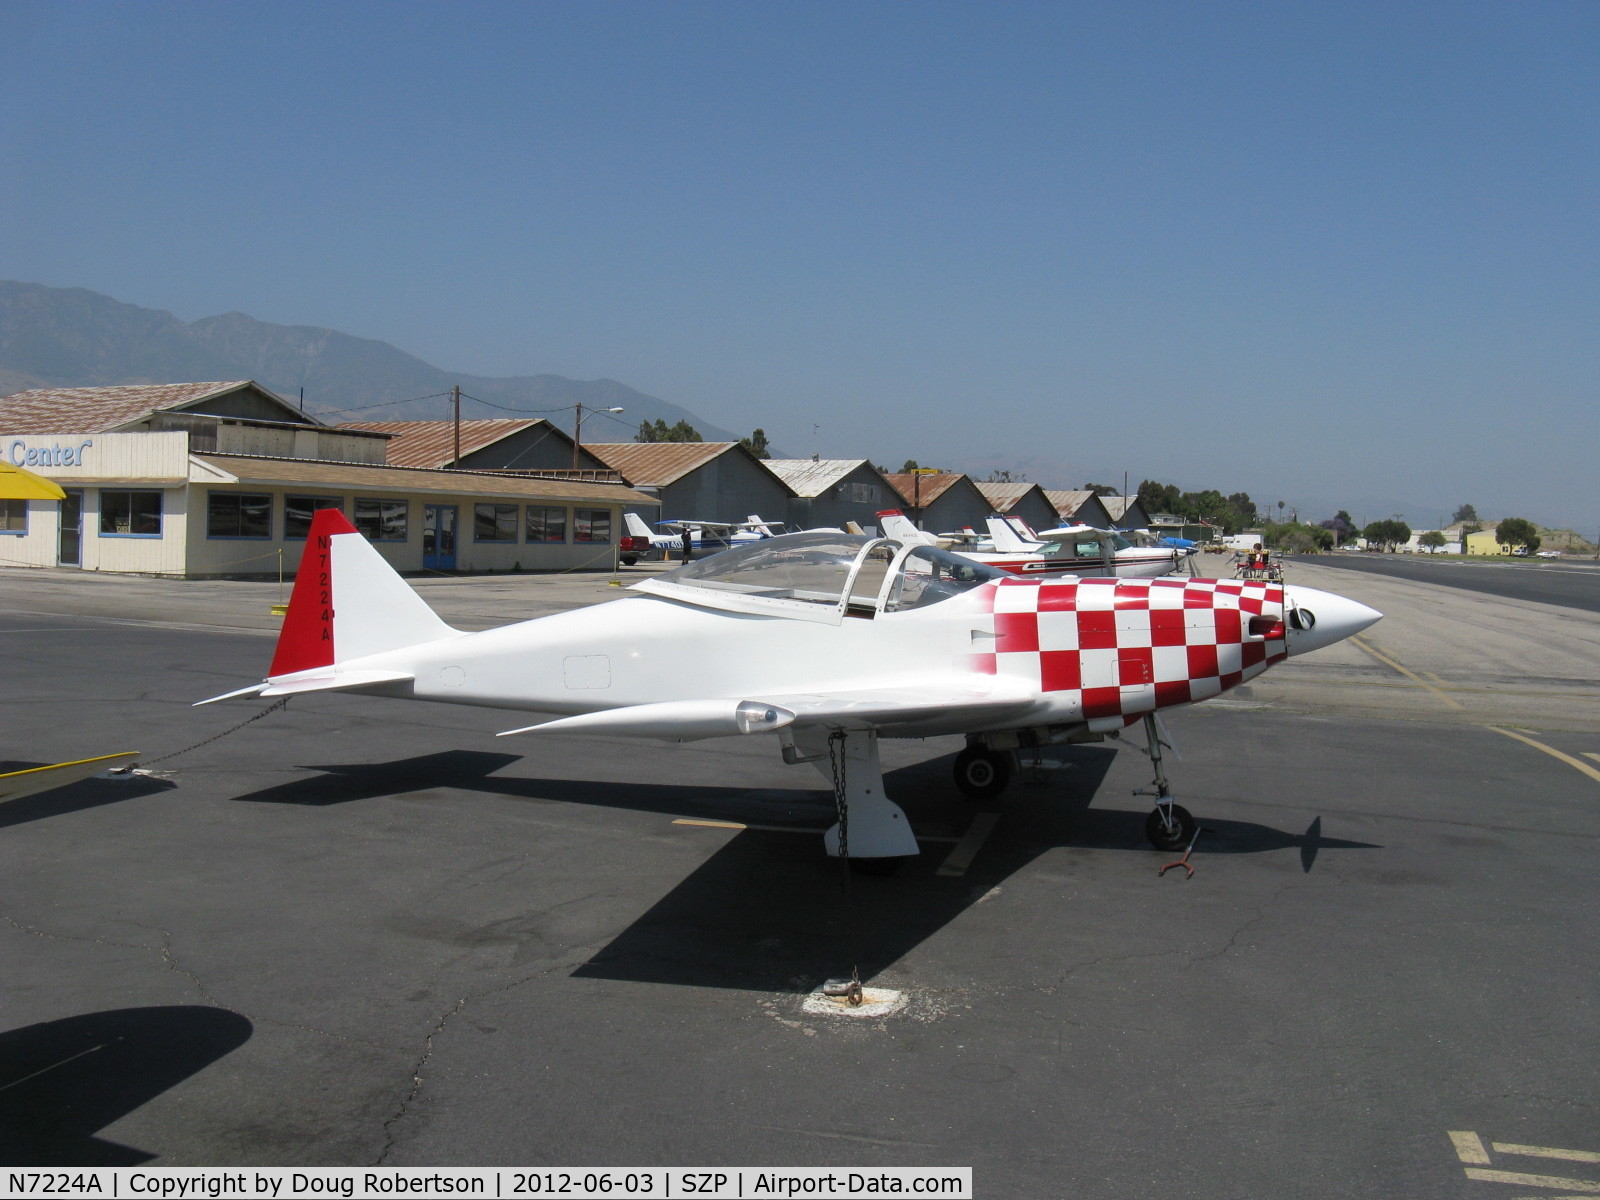 N7224A, 1998 Osprey GP-4 C/N 8, 1998 Baum PEREIRA GP4, Lycoming IO-360-A1A 200 Hp, wood scratch-built retractable gear rare speedster, 240 mph cruise, 2,200 fpm rate of climb, 1,200 mile range w/reserves, two seats